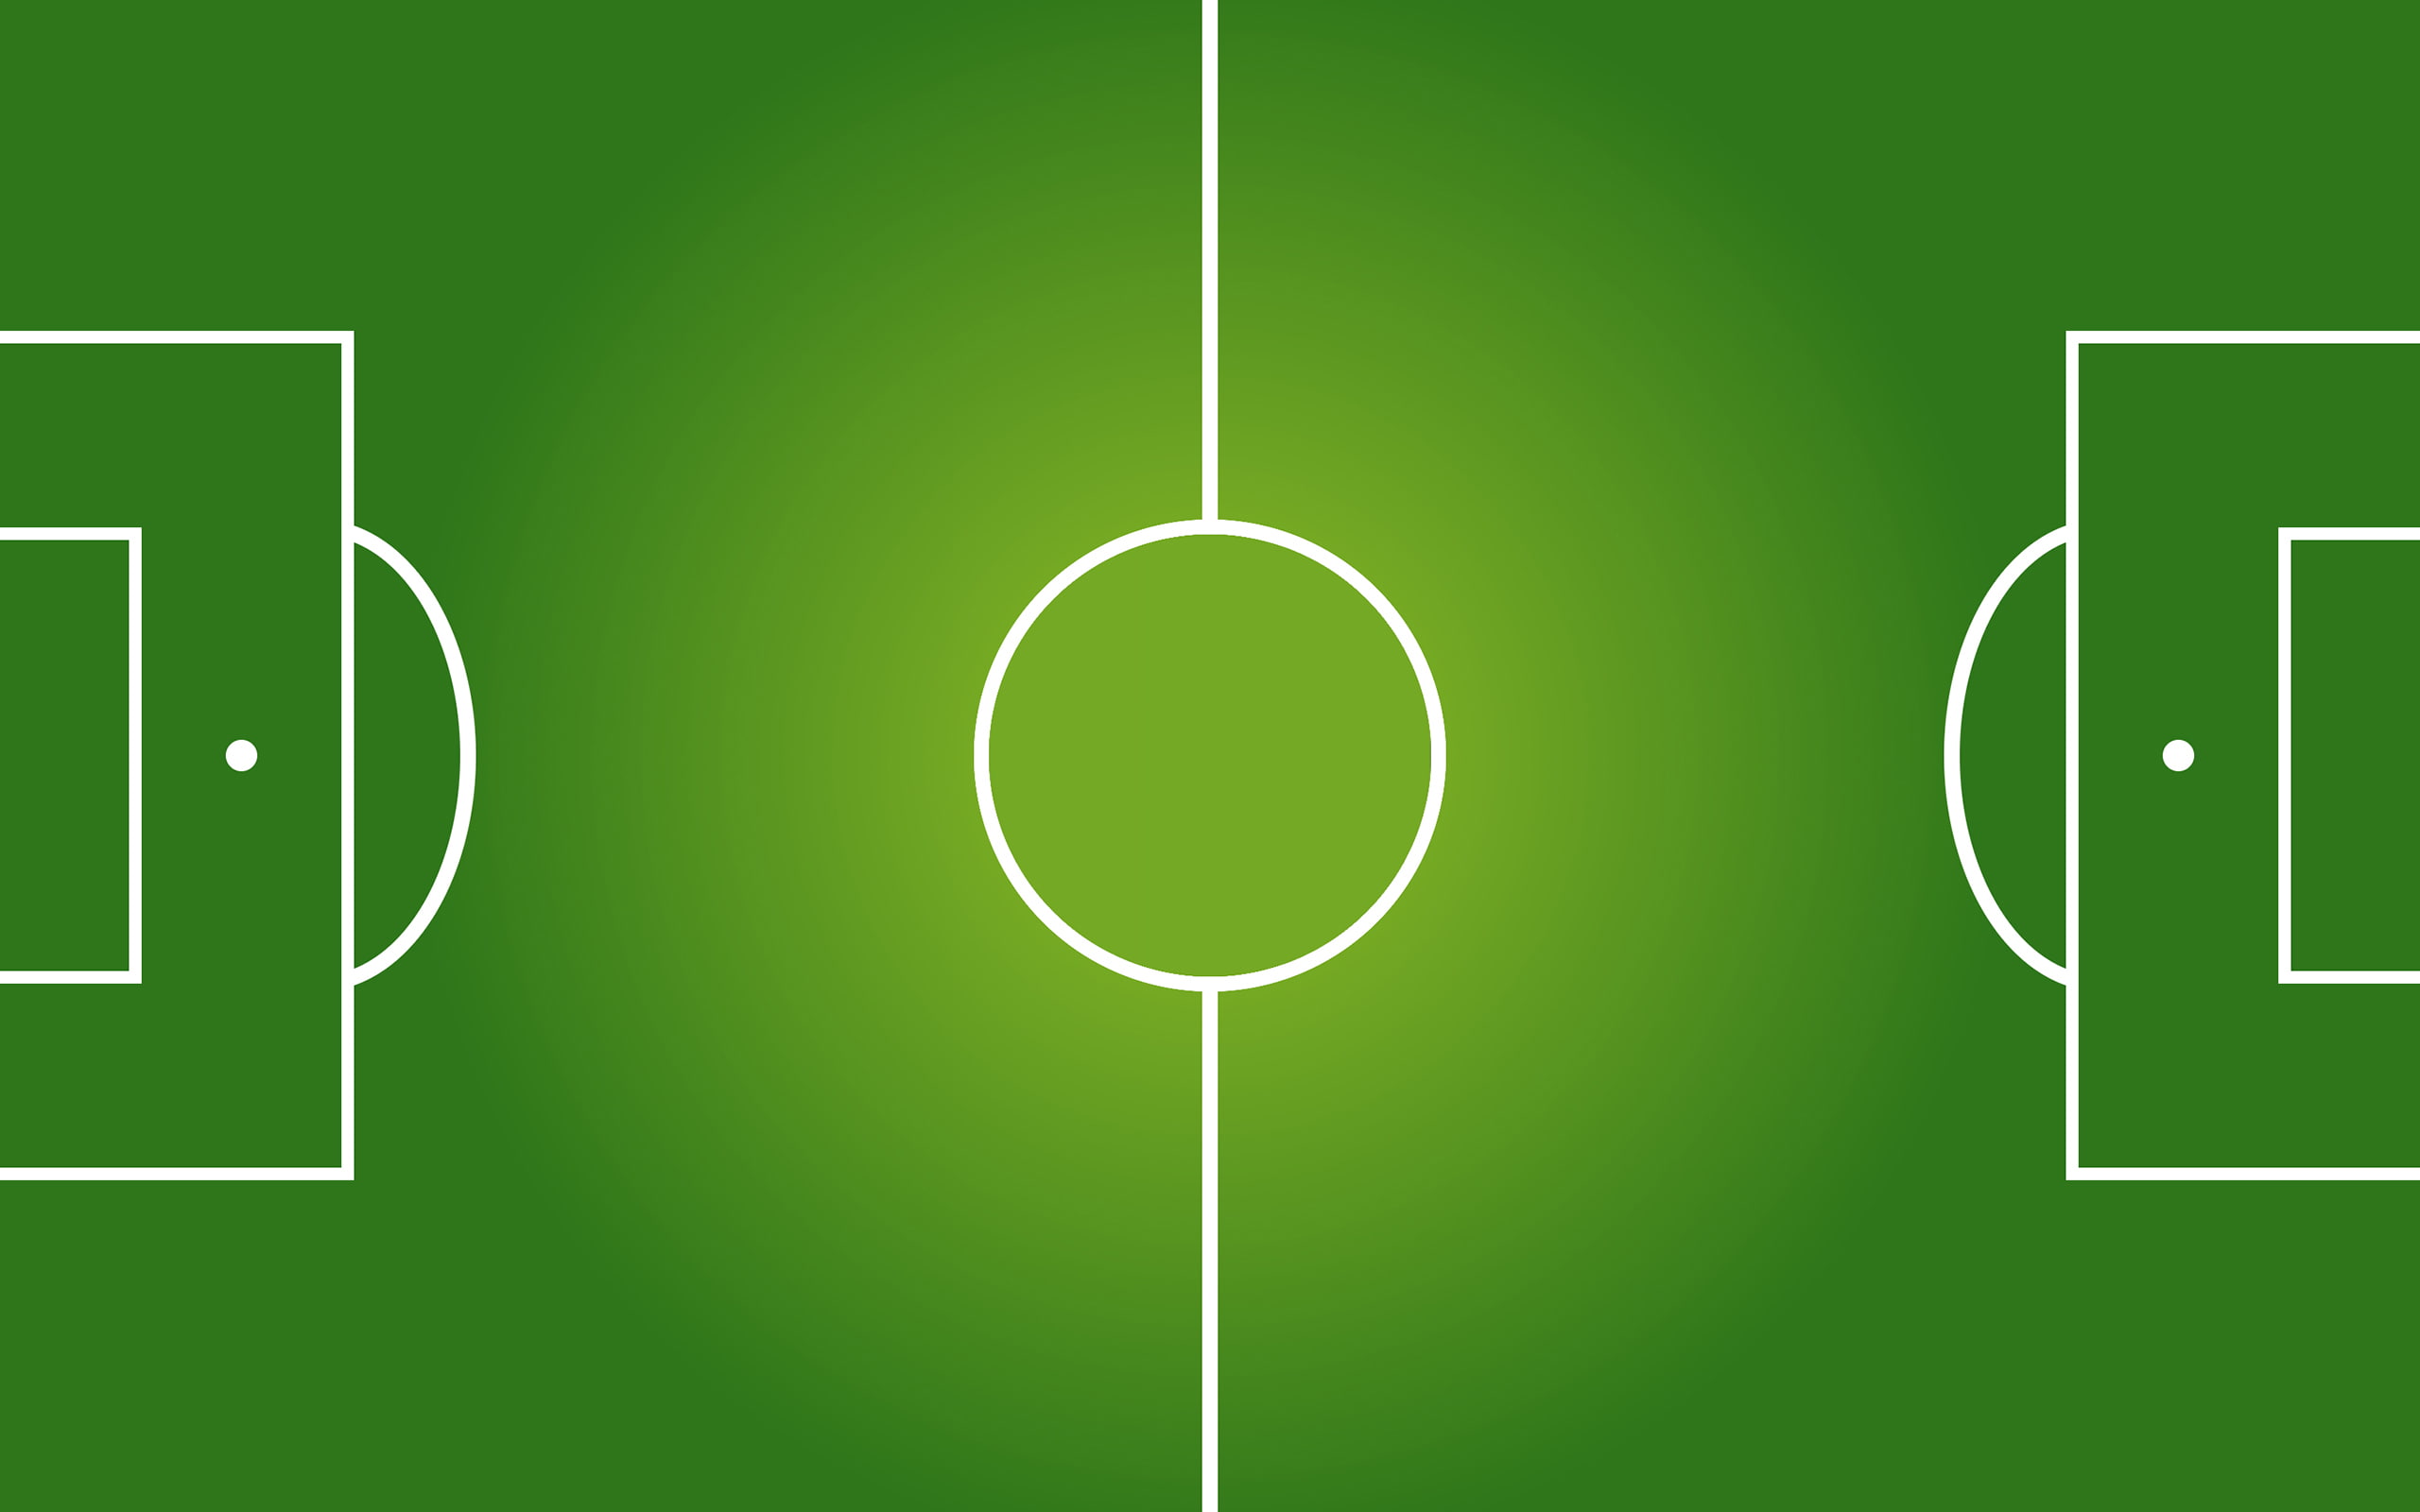 soccer pitches, sports, minimalism, gradient, green color, green background